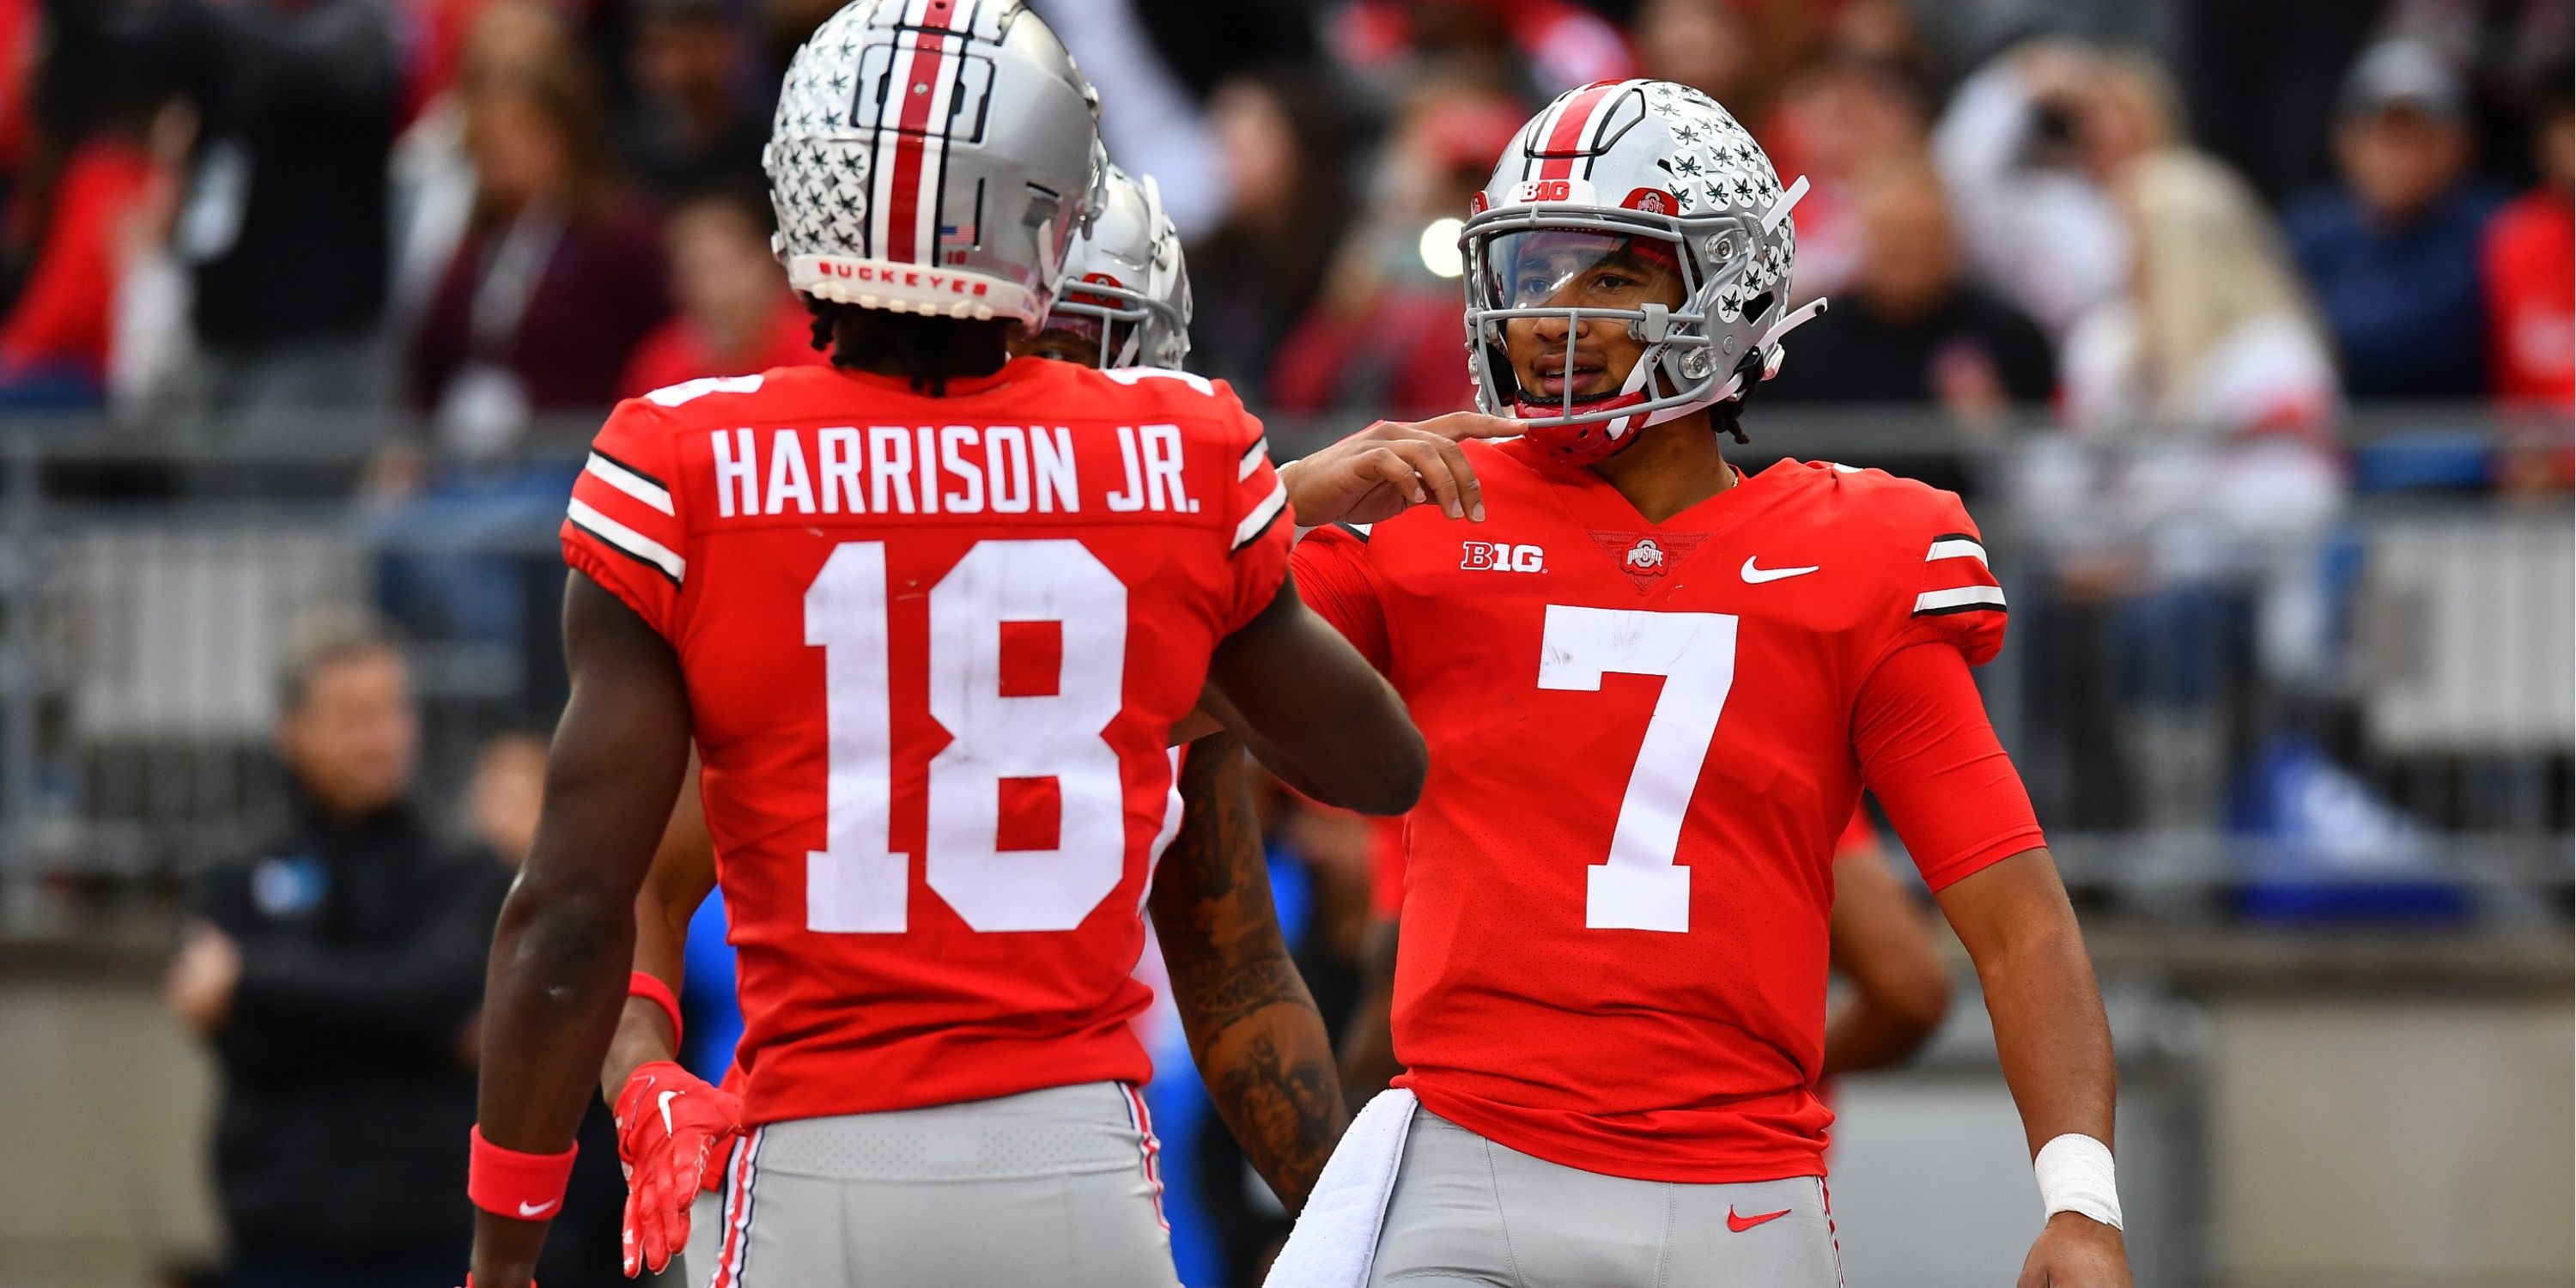 C.J. Stroud & Marvin Harrison Jr. celebrate a play at Ohio State